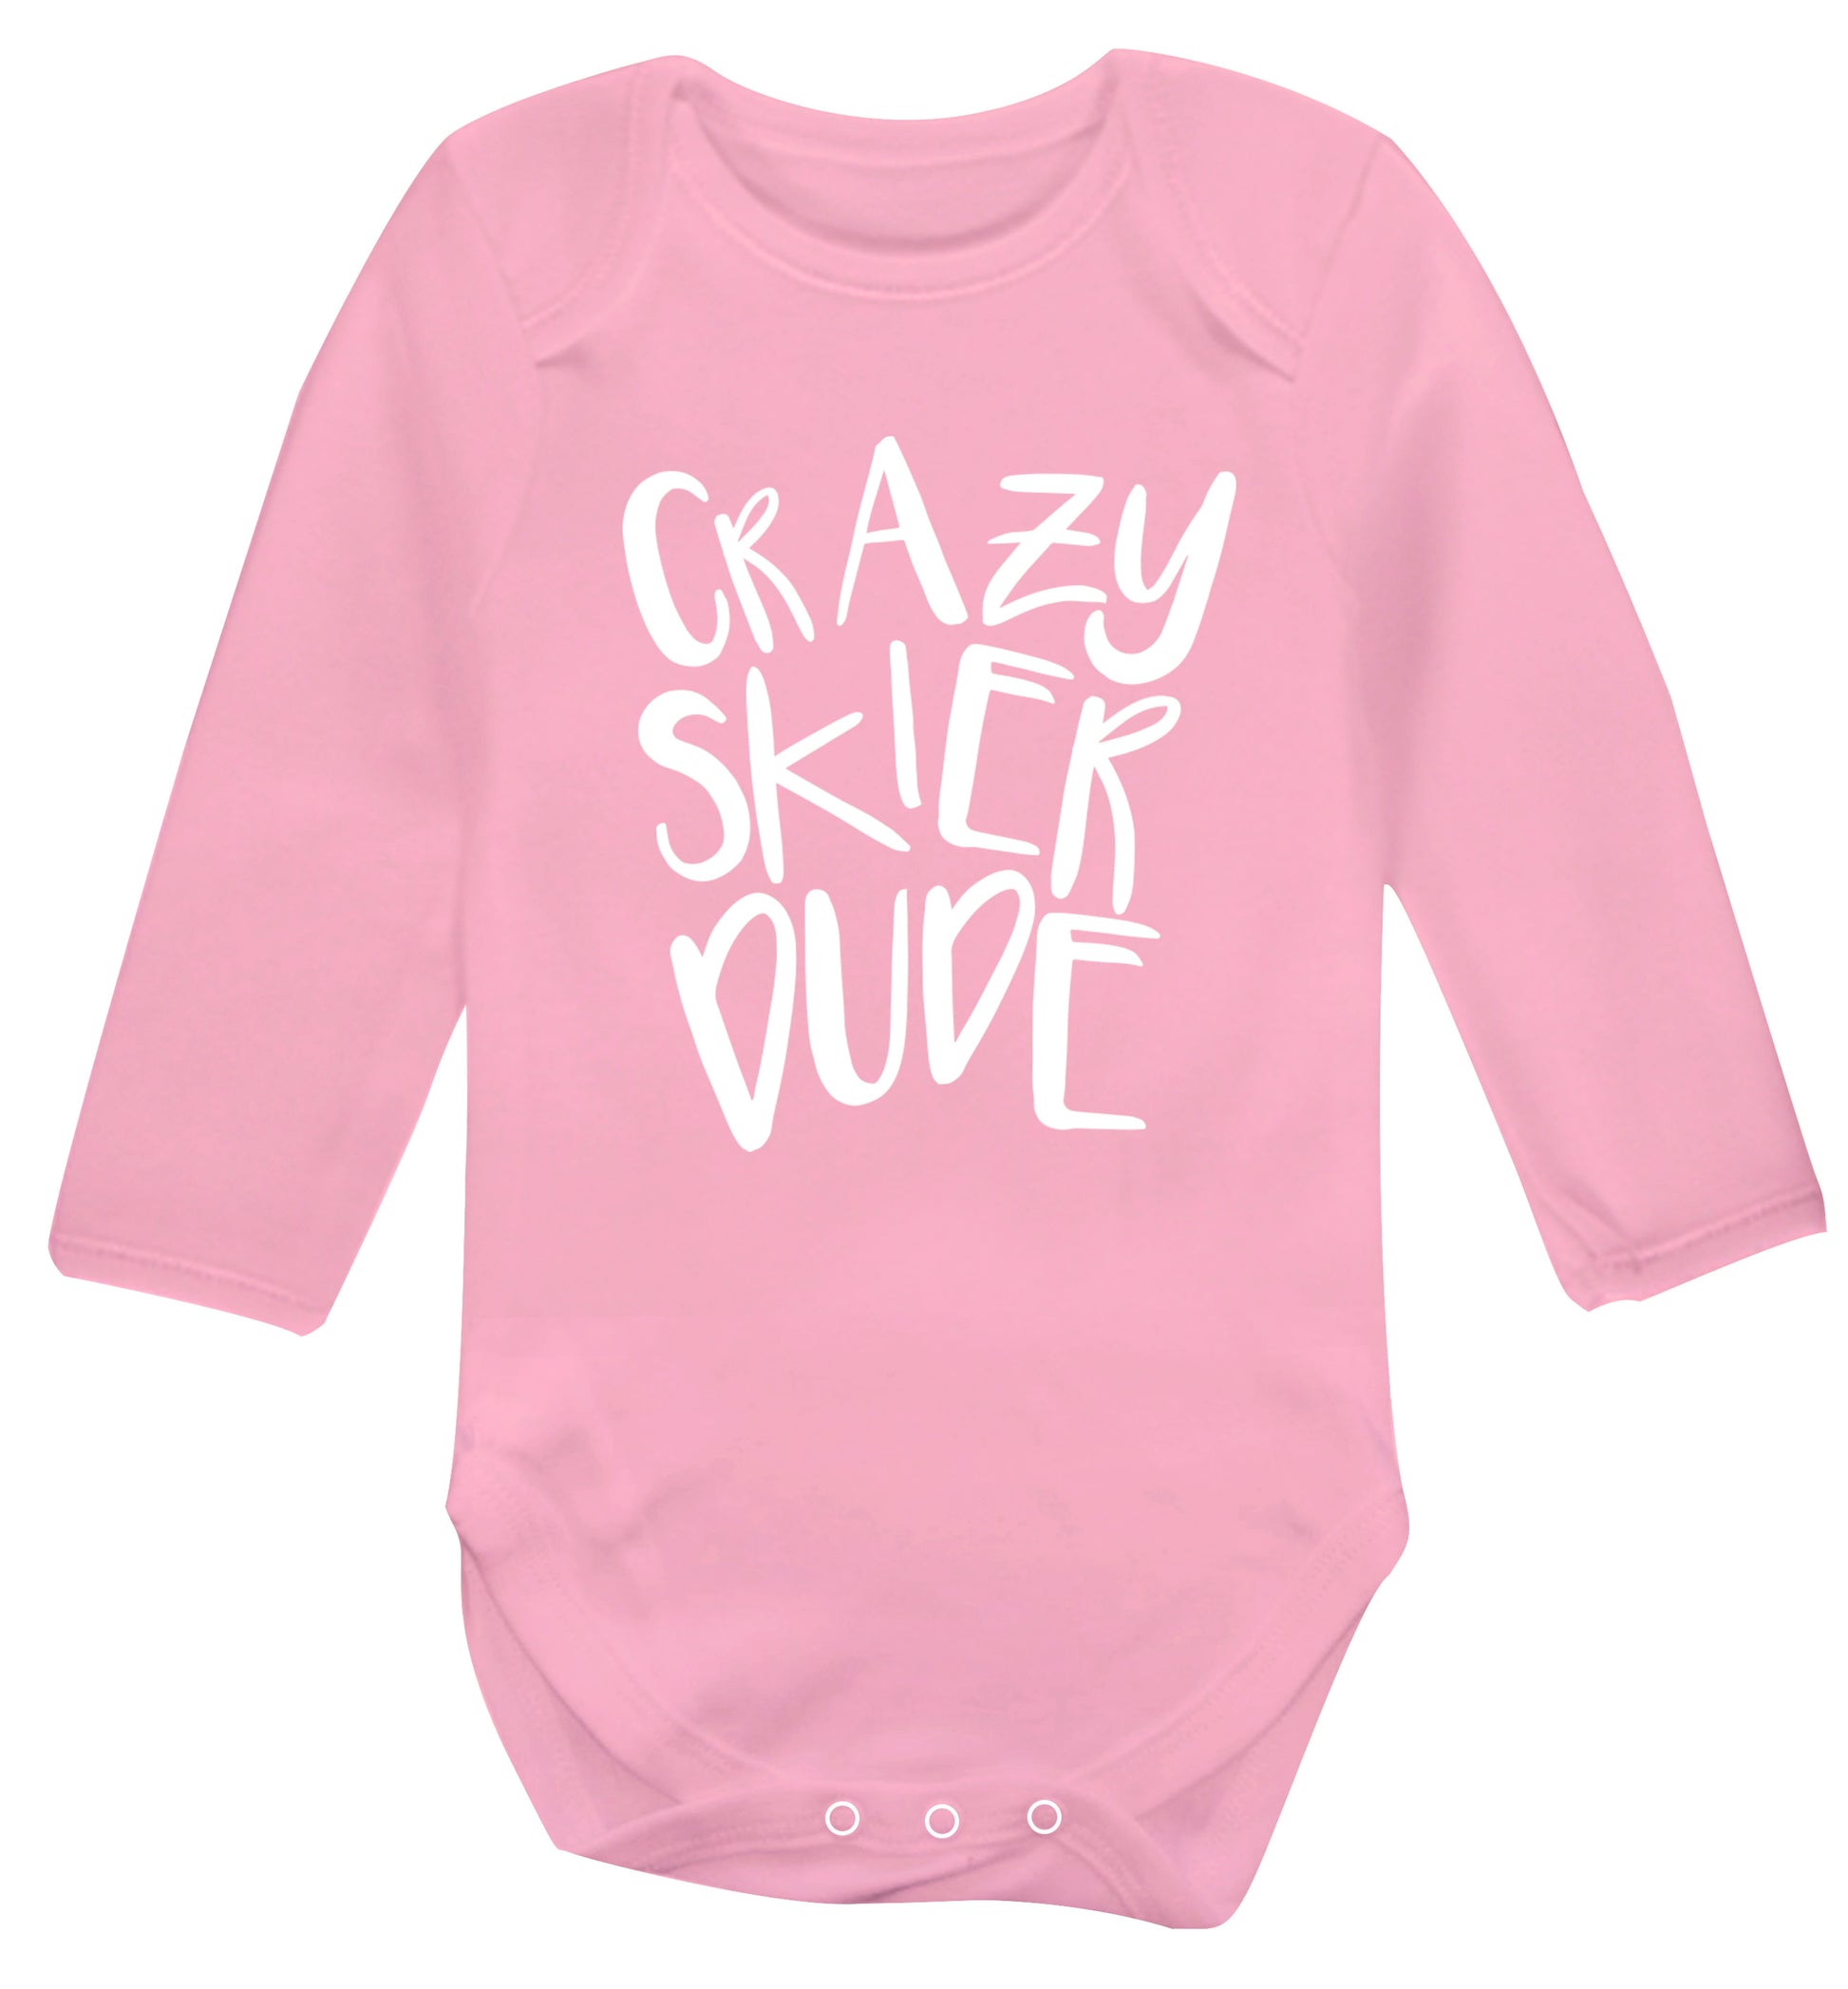 Crazy skier dude Baby Vest long sleeved pale pink 6-12 months